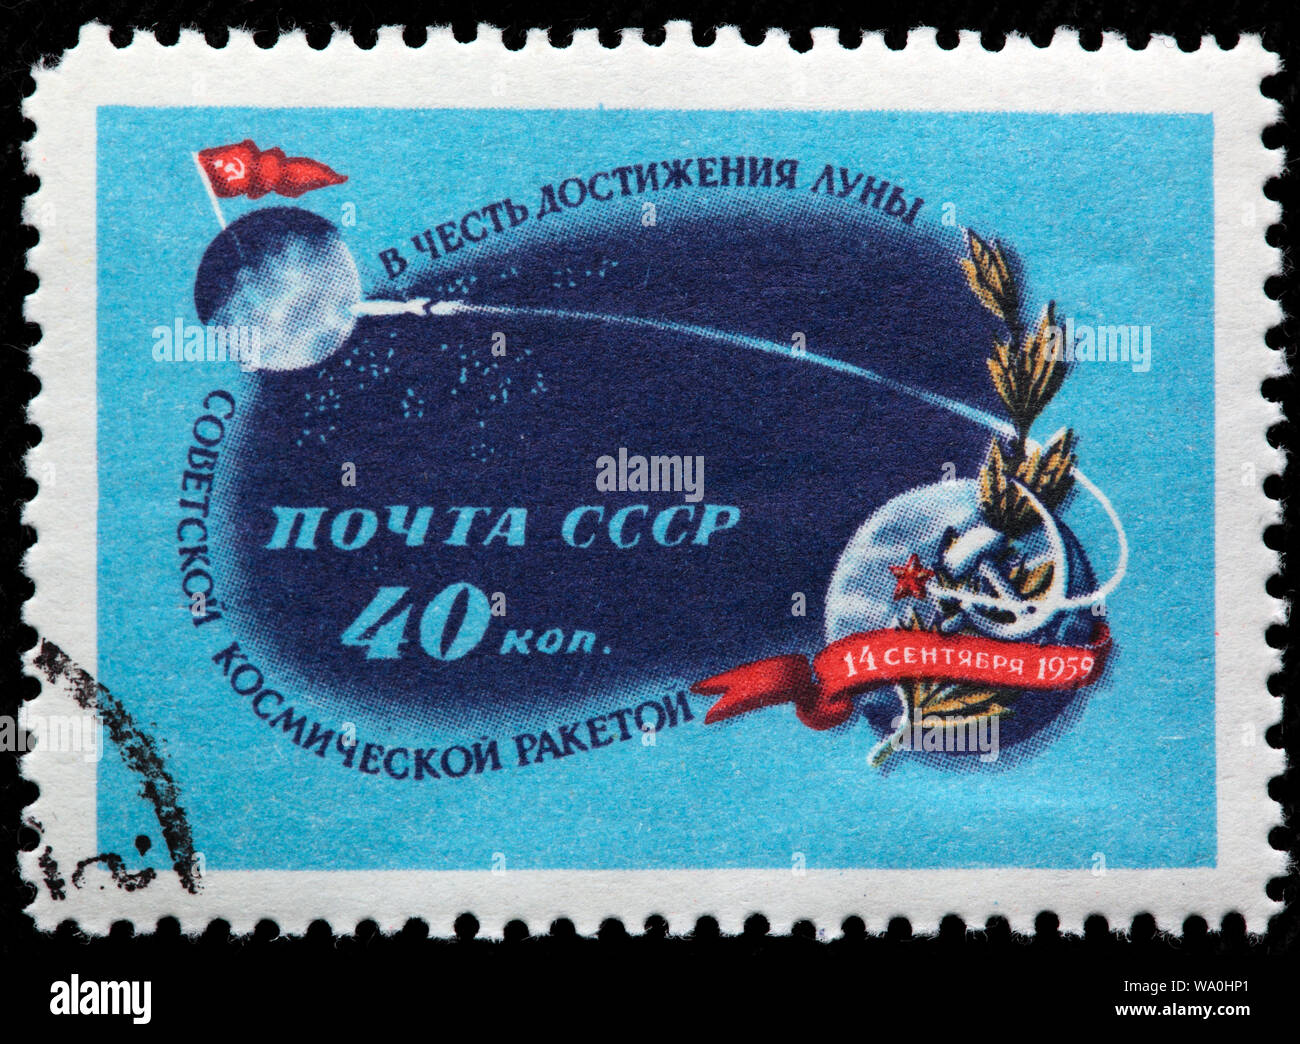 Launch of second space moon rocket, postage stamp, Russia, USSR, 1959 Stock Photo